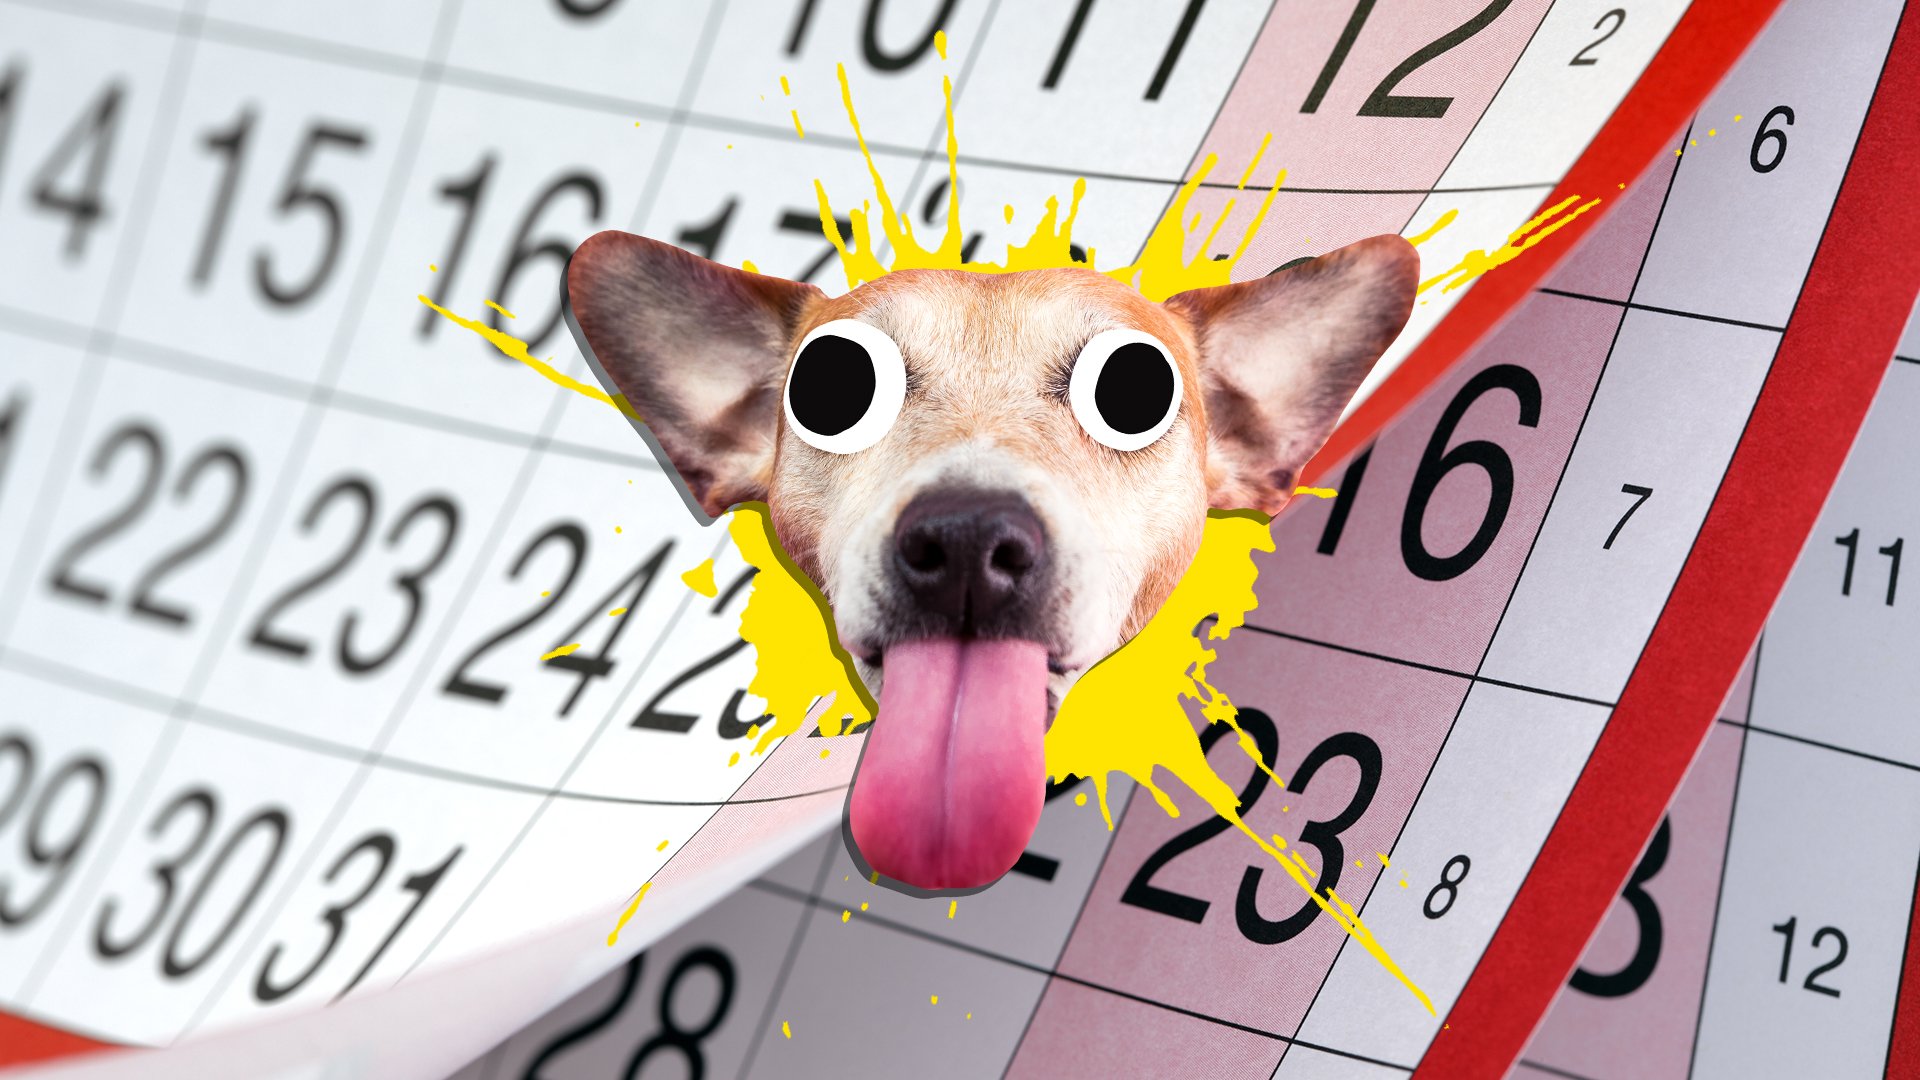 A dog sticking it's tongue out on a calendar